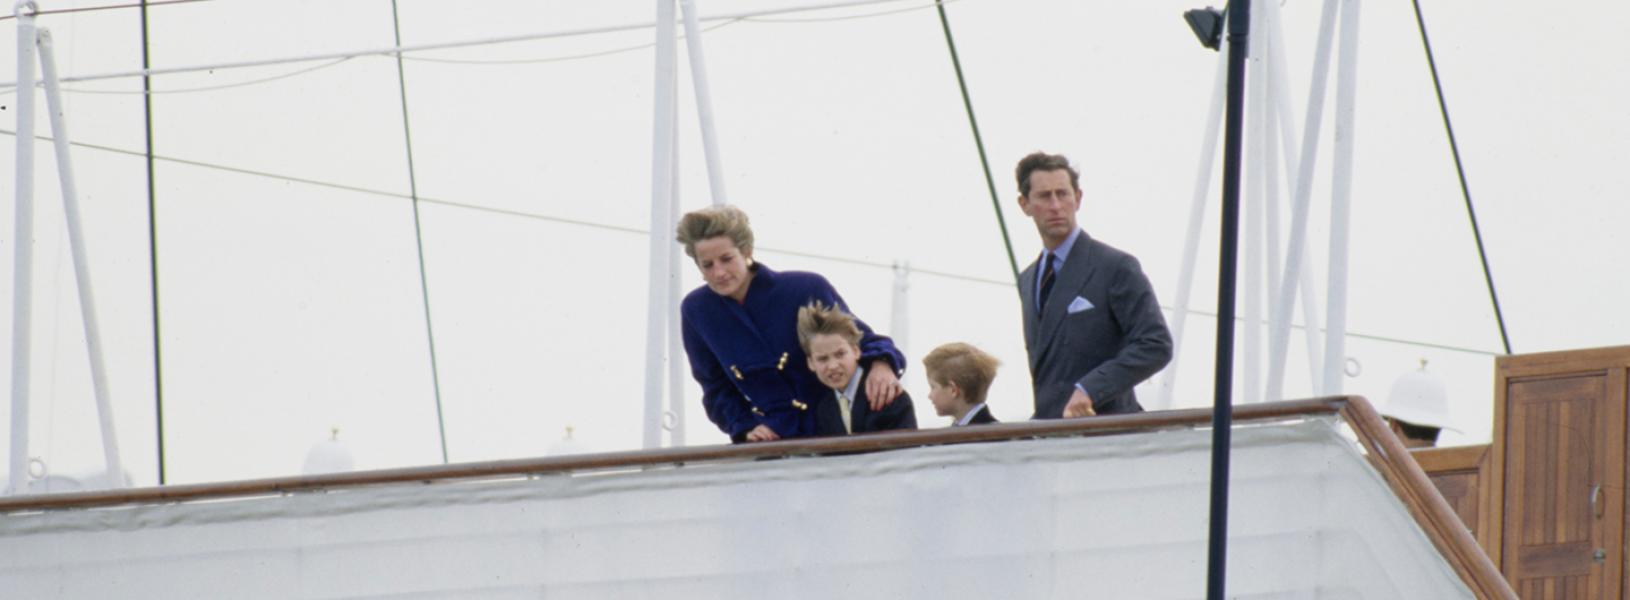 The Prince and Princess of Wales with Prince William and Prince Harry on the deck of the Royal Yacht Britannia, Toronto, Oct. 27. 1991.